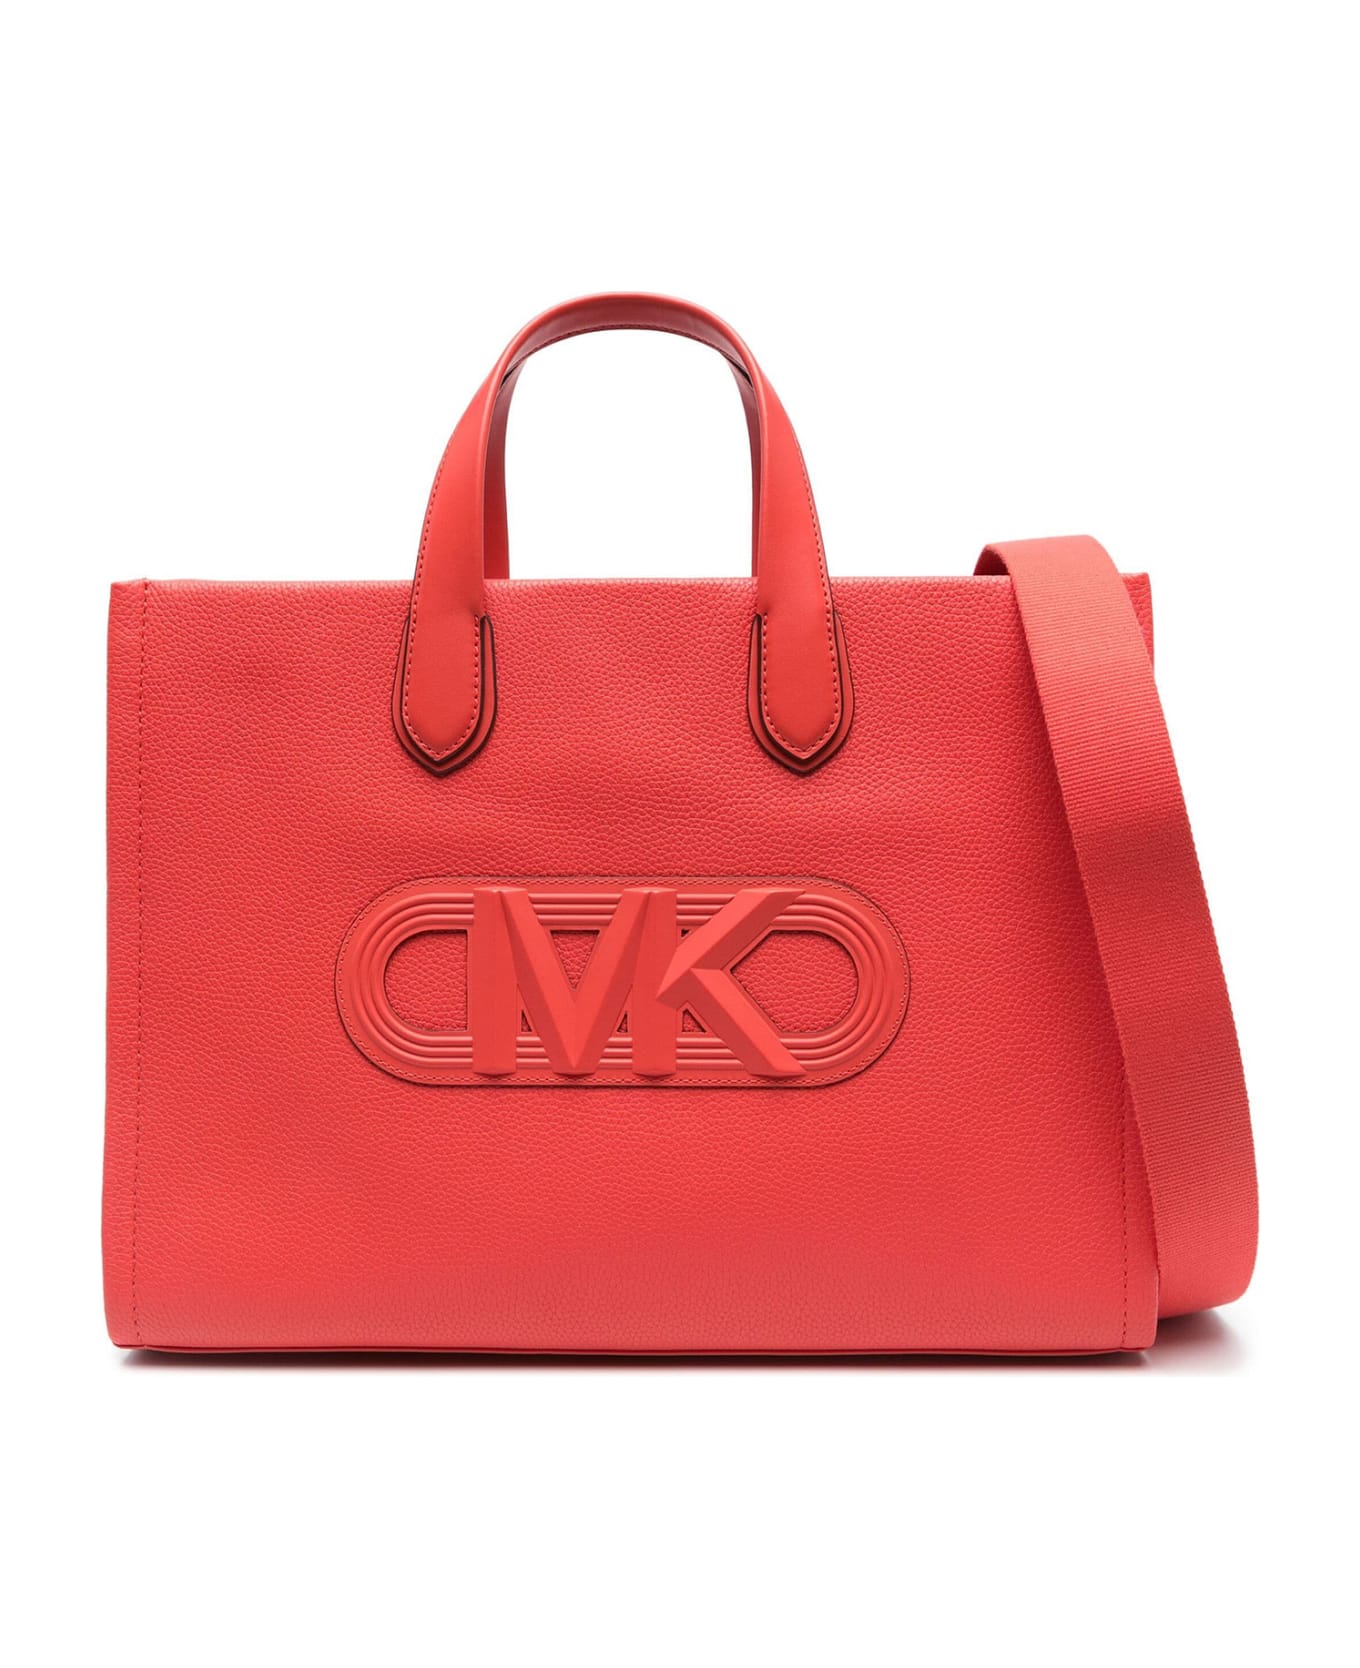 Michael Kors Large Tote Bag With Logo - SPICED CORAL トートバッグ